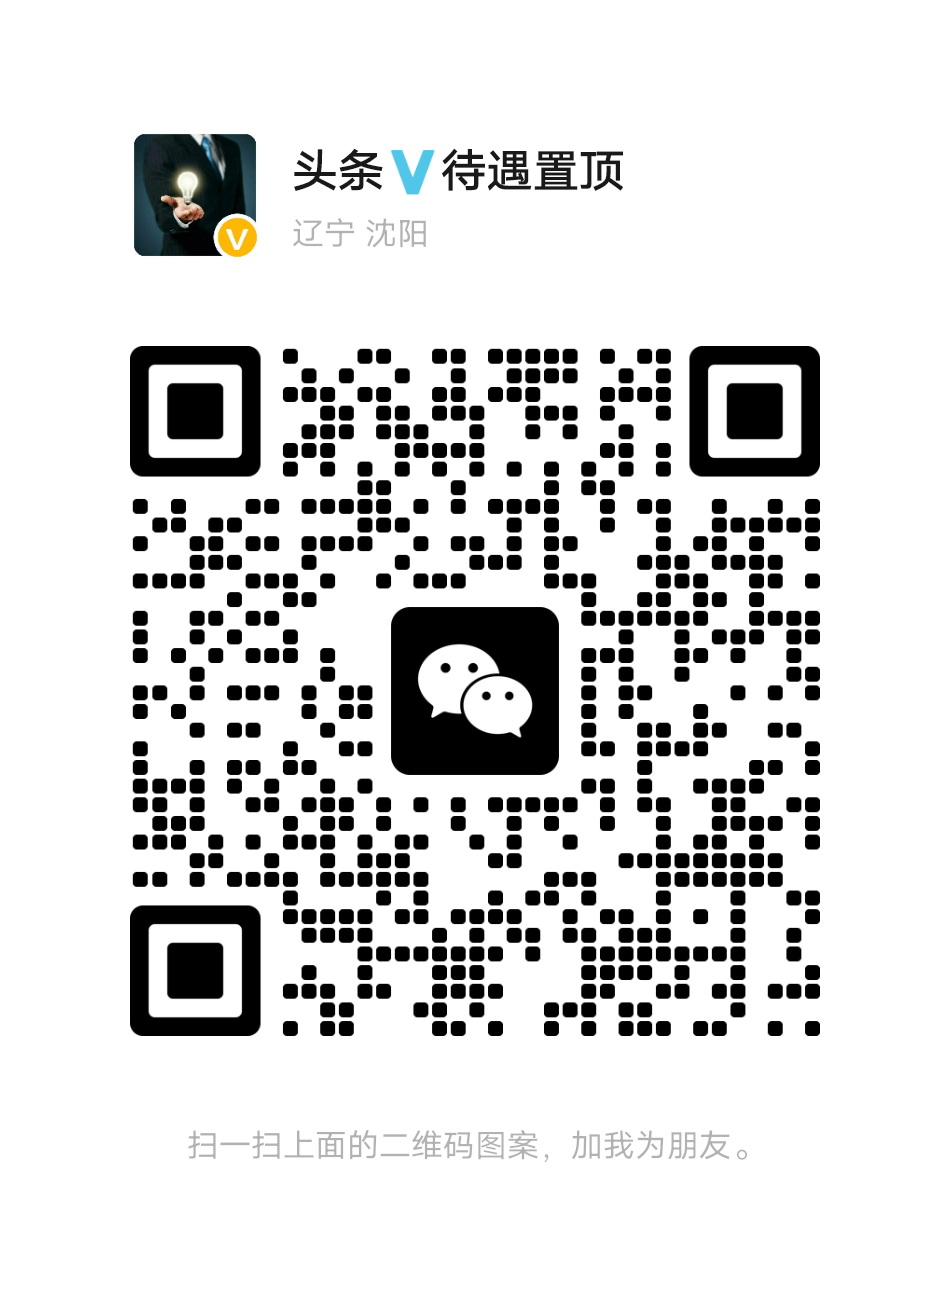 mmqrcode1668611364767.png